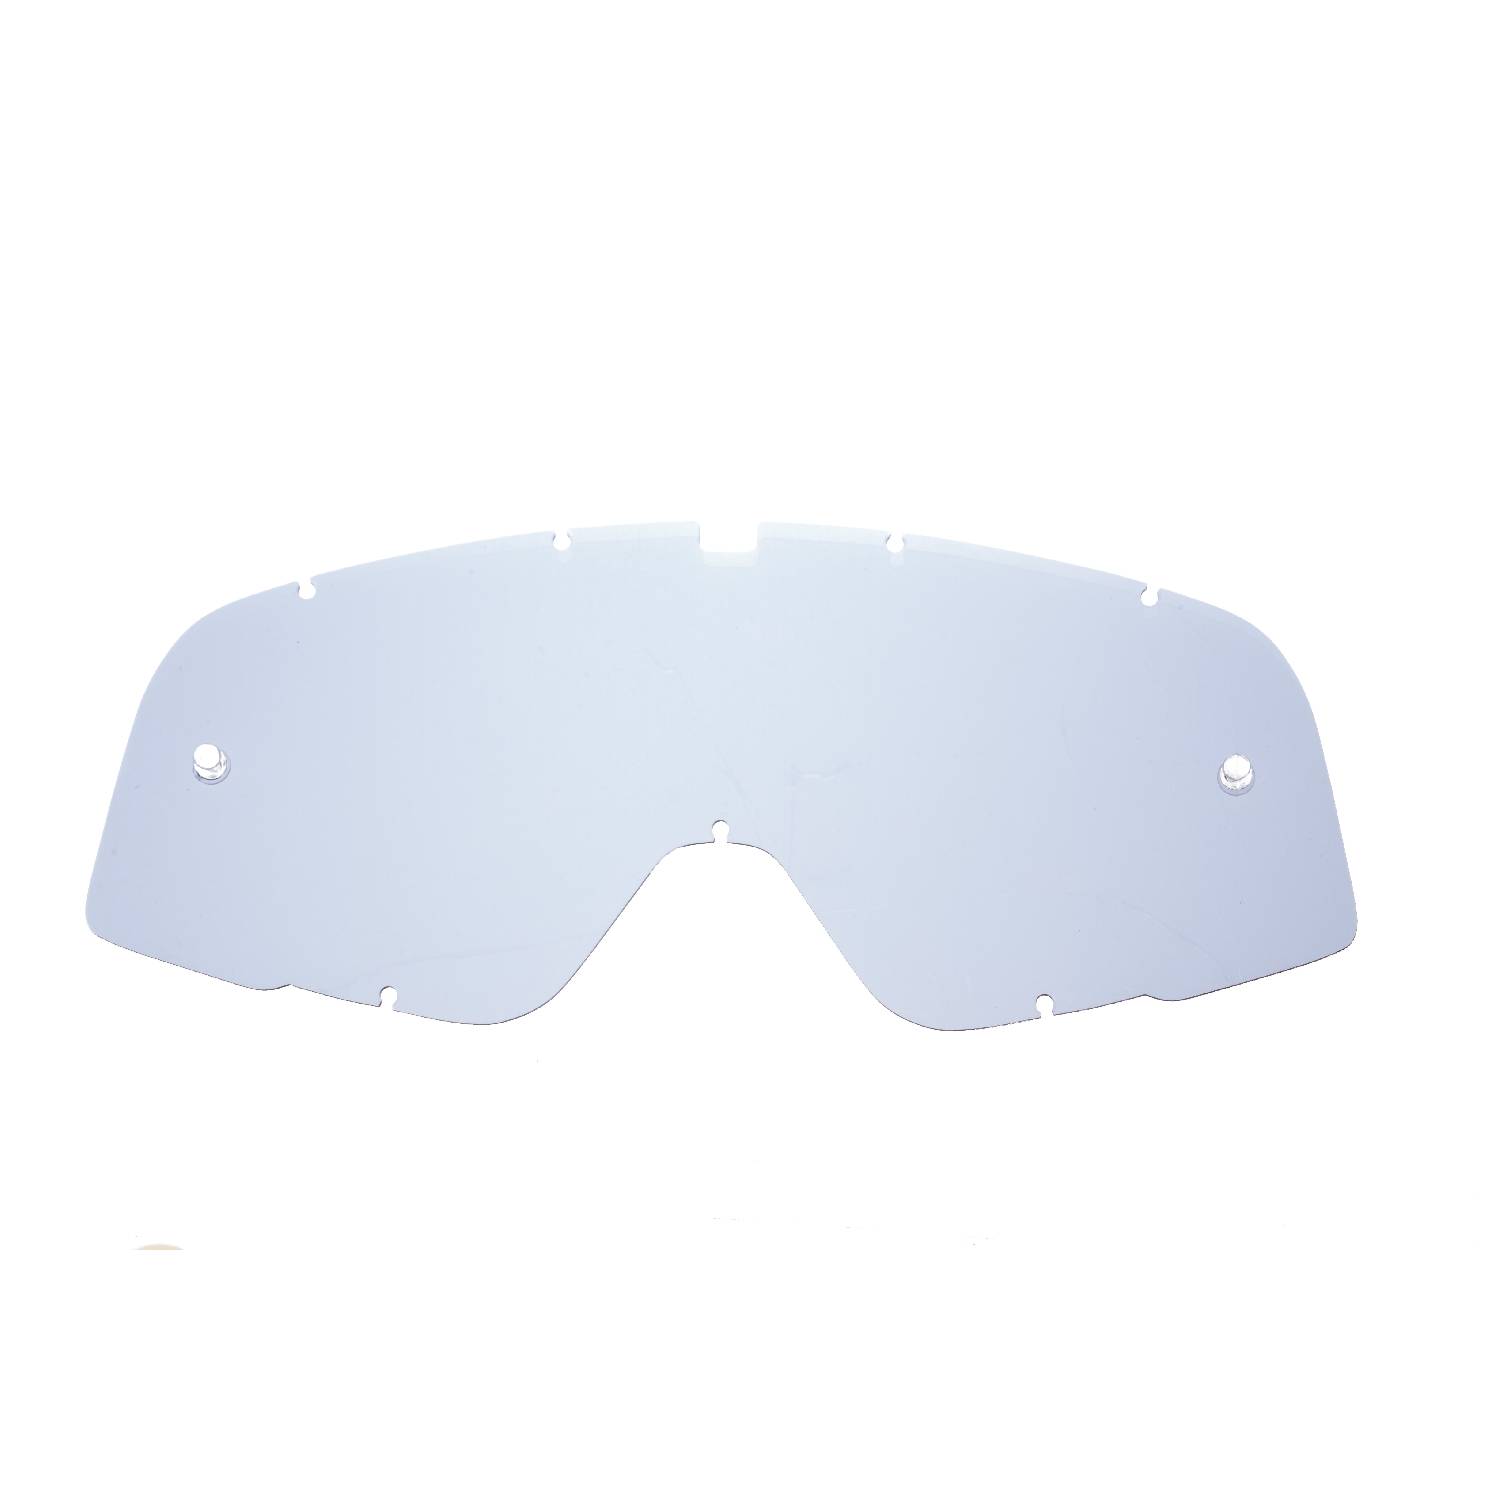 smokey replacement lenses  compatible for 100% Barstow goggle